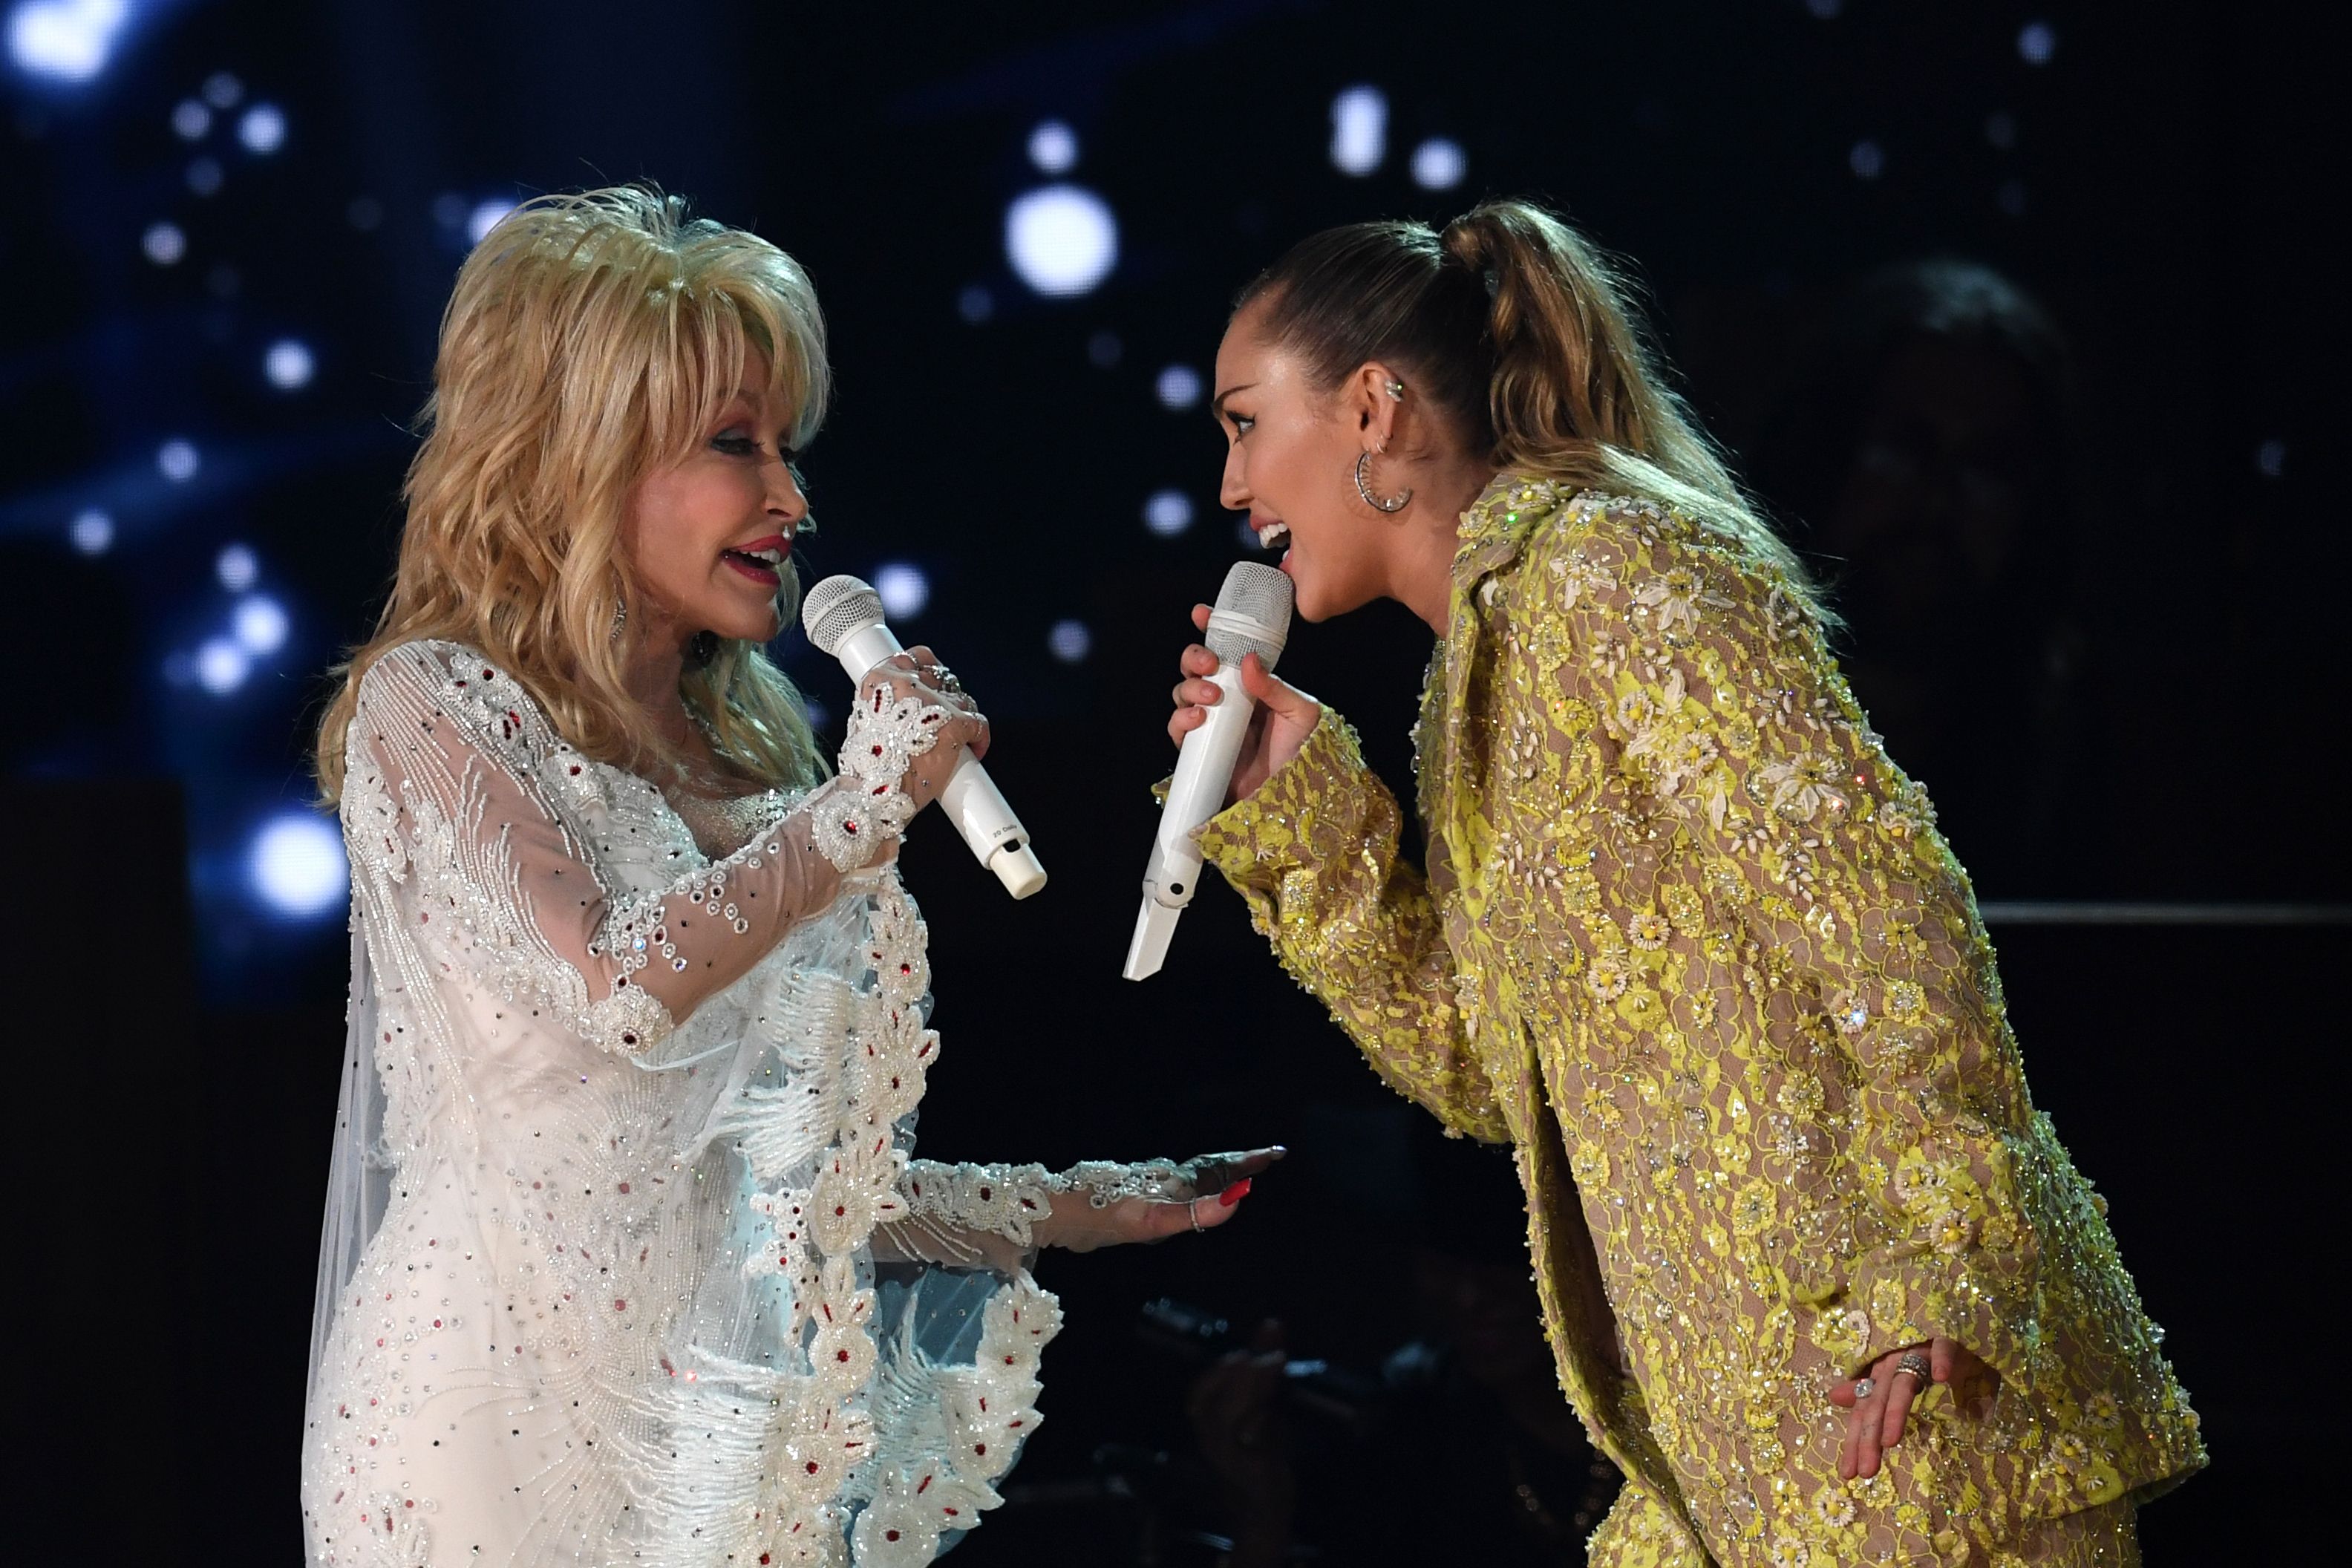 Dolly Parton and Miley Cyrus in Los Angeles on February 10, 2019 | Source: Getty Images